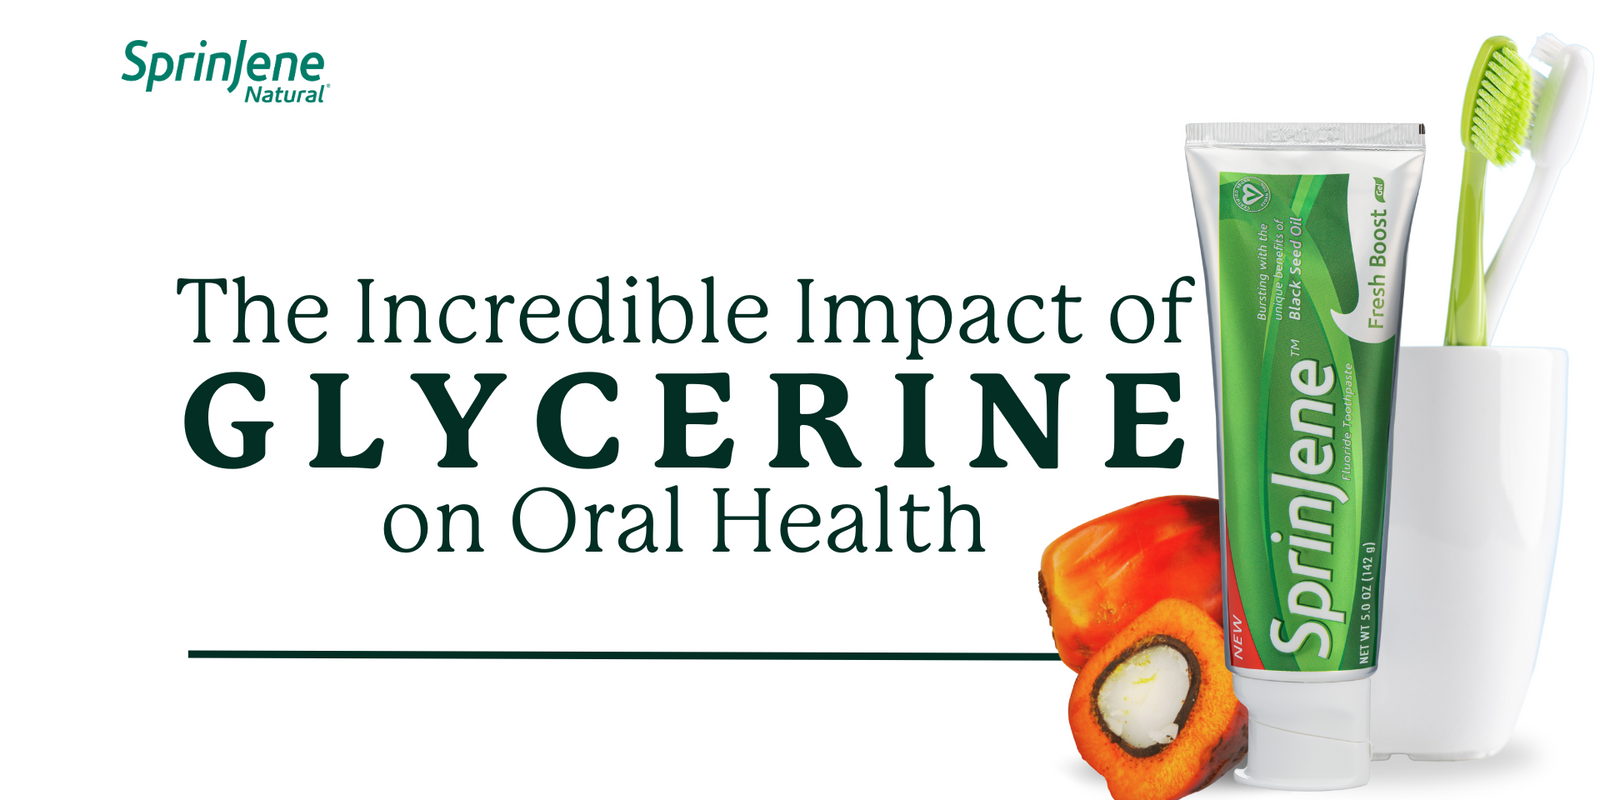 The Incredible Impact of Glycerine on Oral Health